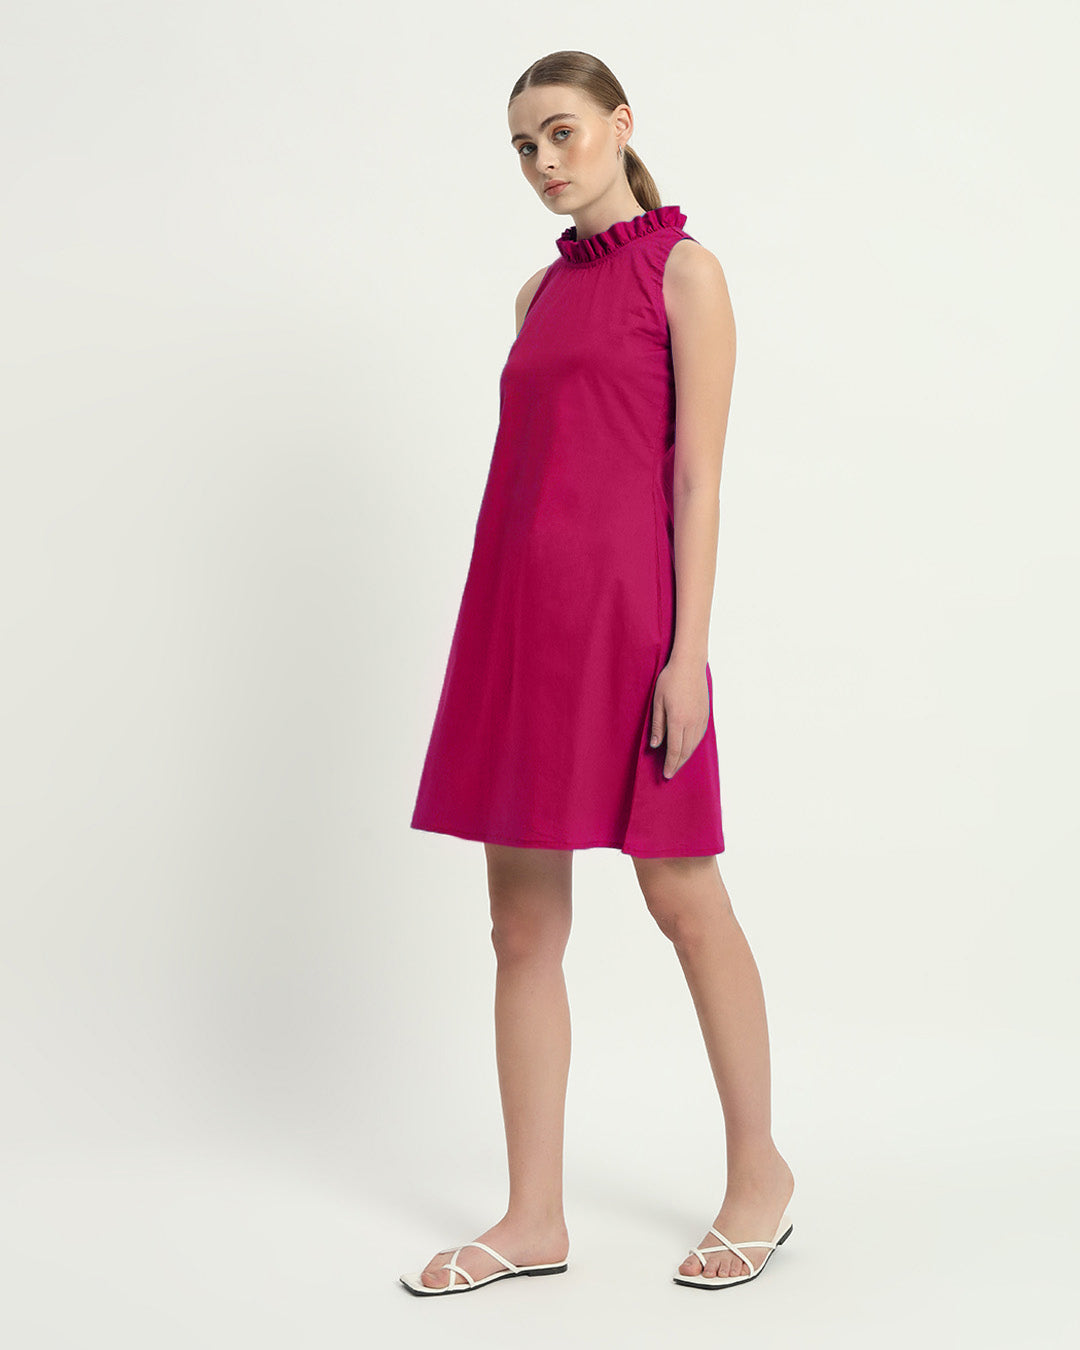 The Angelica Berry Cotton Dress